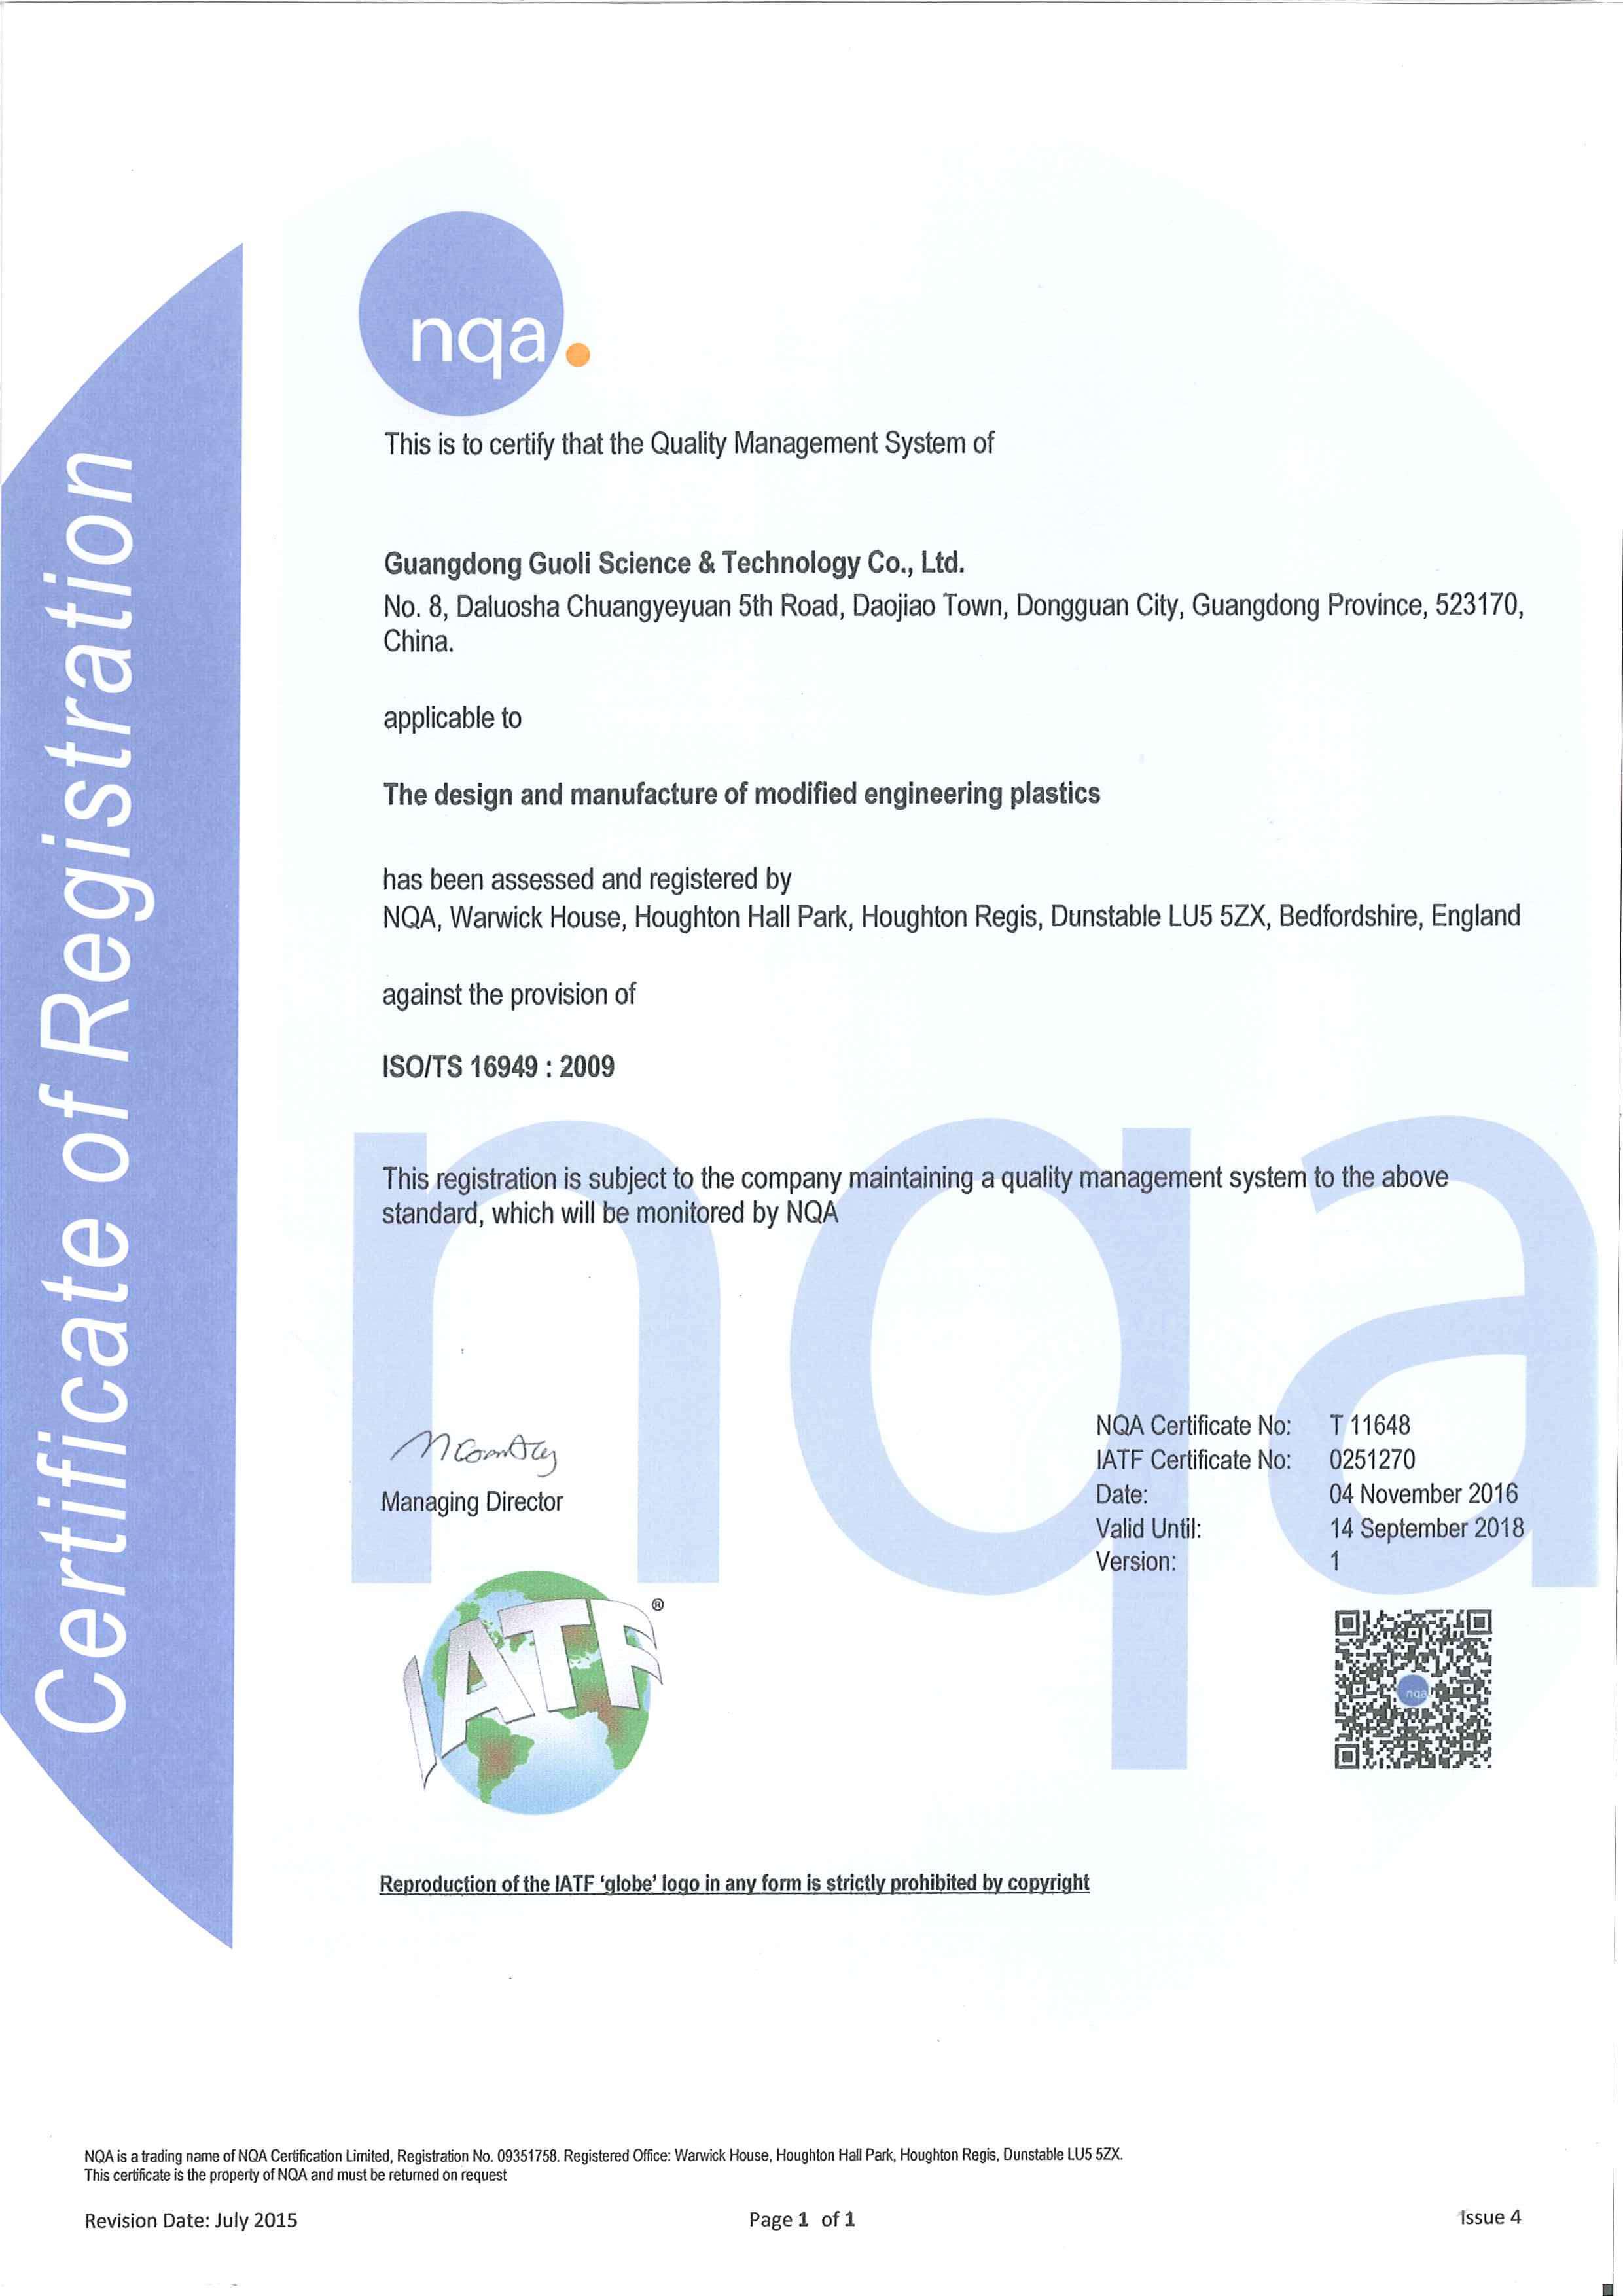 ISO/TS 16949:2009 certificate for the design and production of modified engineering plastics